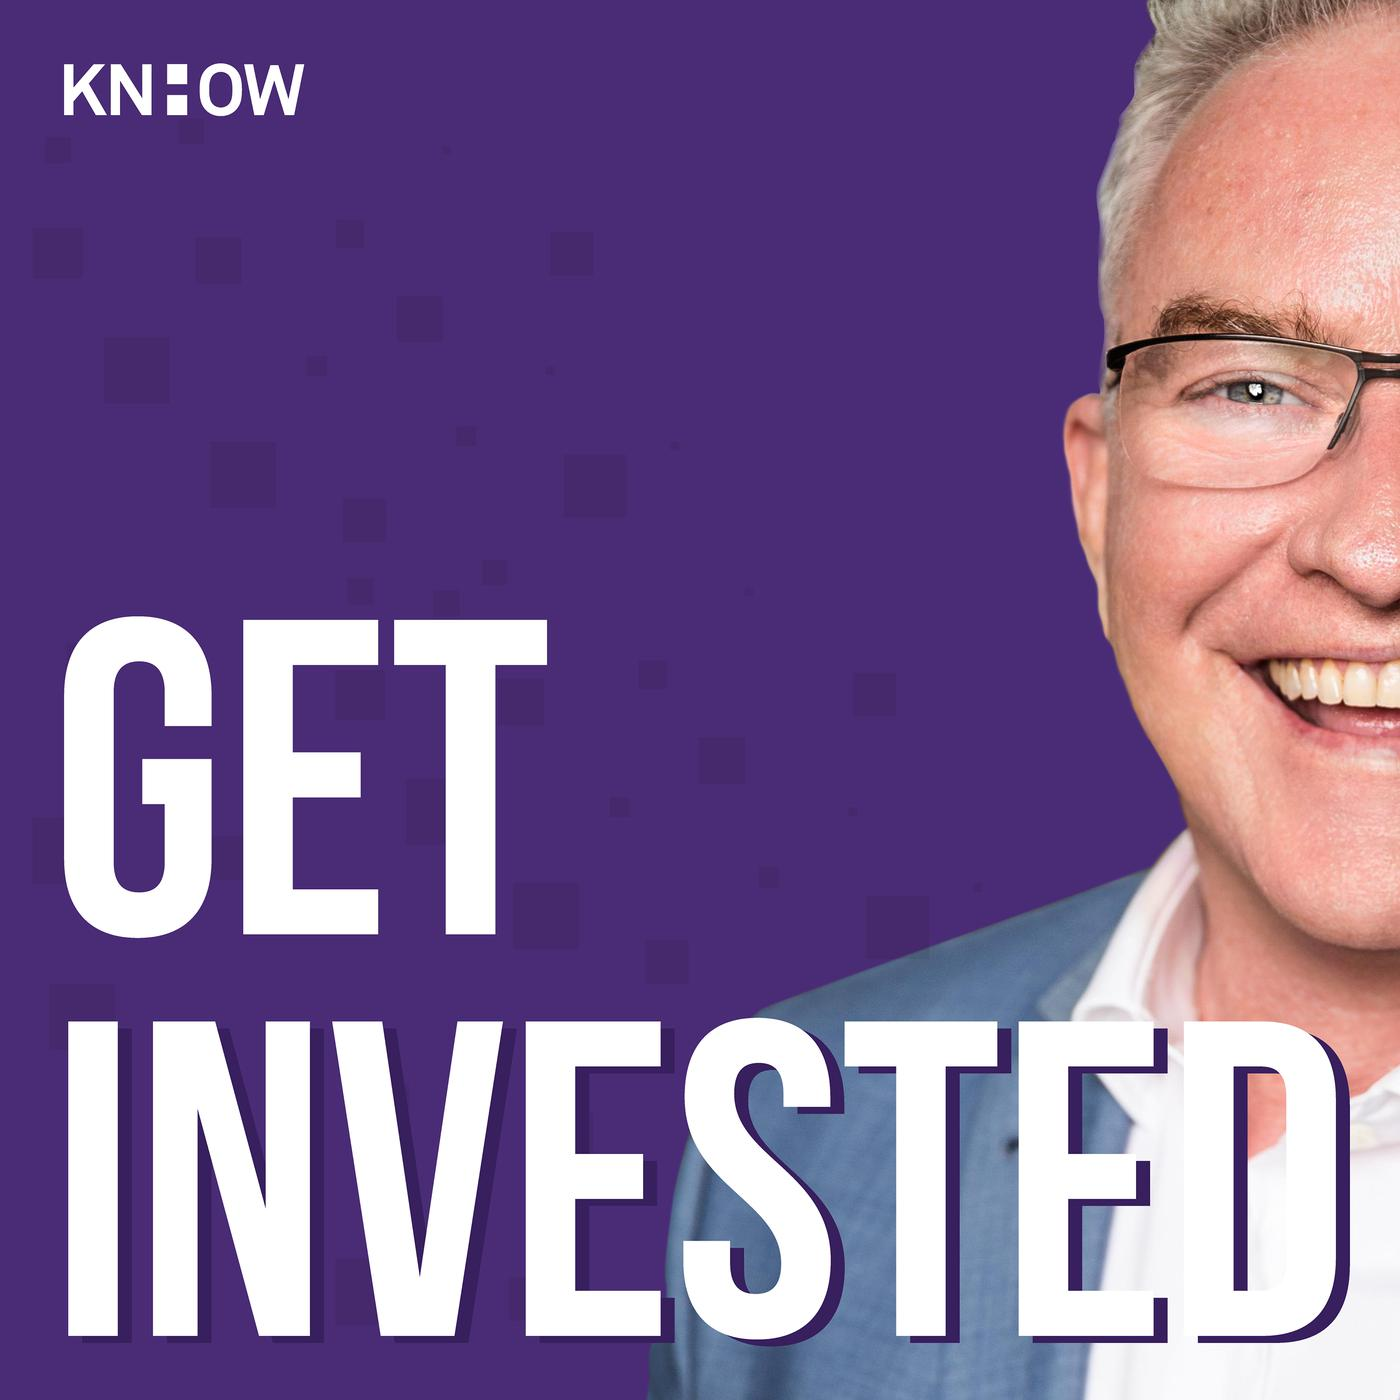 Get Invested: Luke Smith on investing in Smart Money Strategy